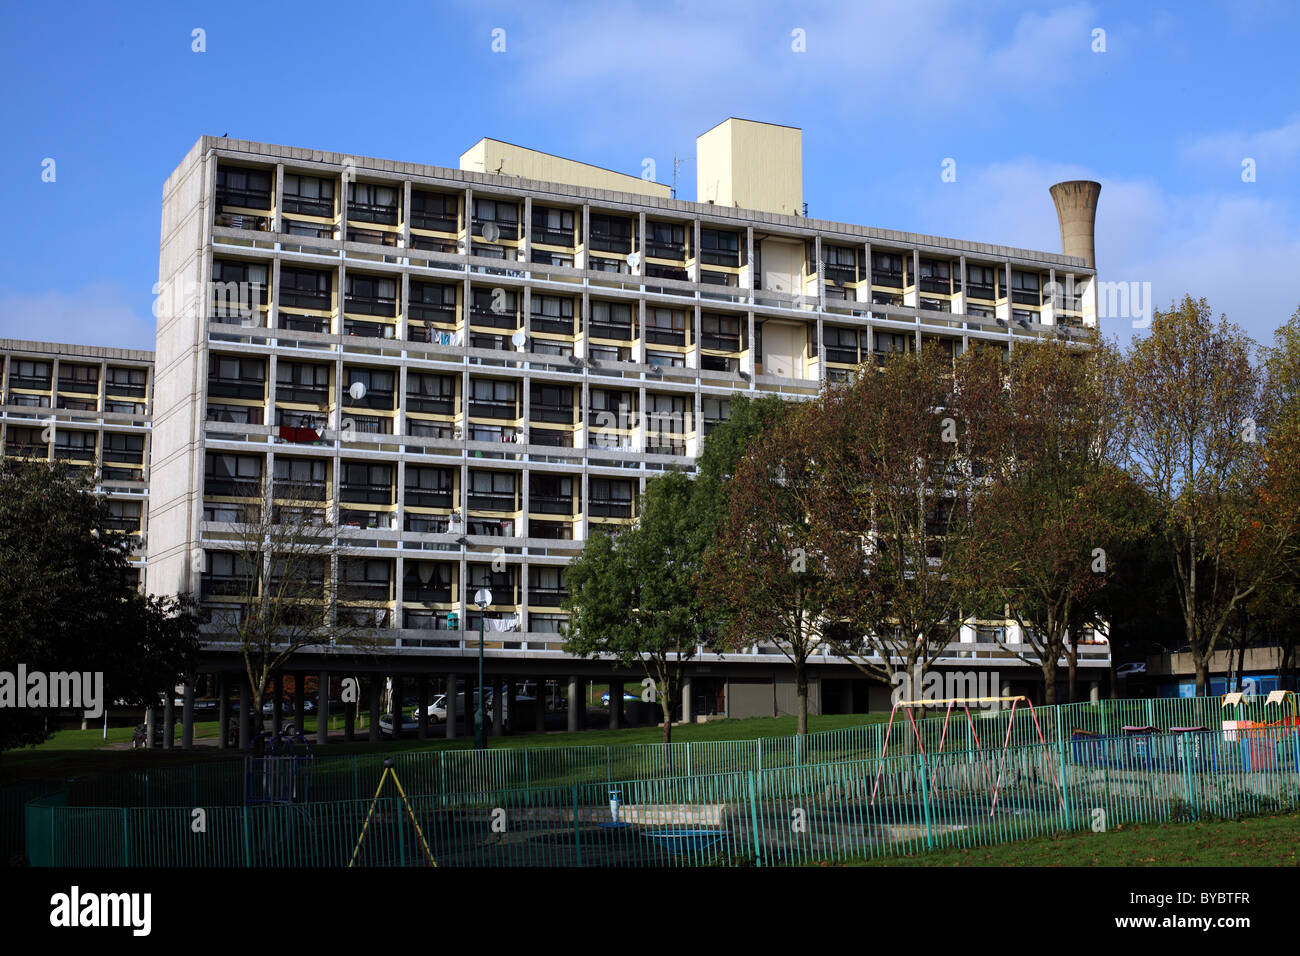 One of the Le Corbusier-inspired 'slab' blocks on the Alton Estate West, Roehampton, south London Sw15 Stock Photo